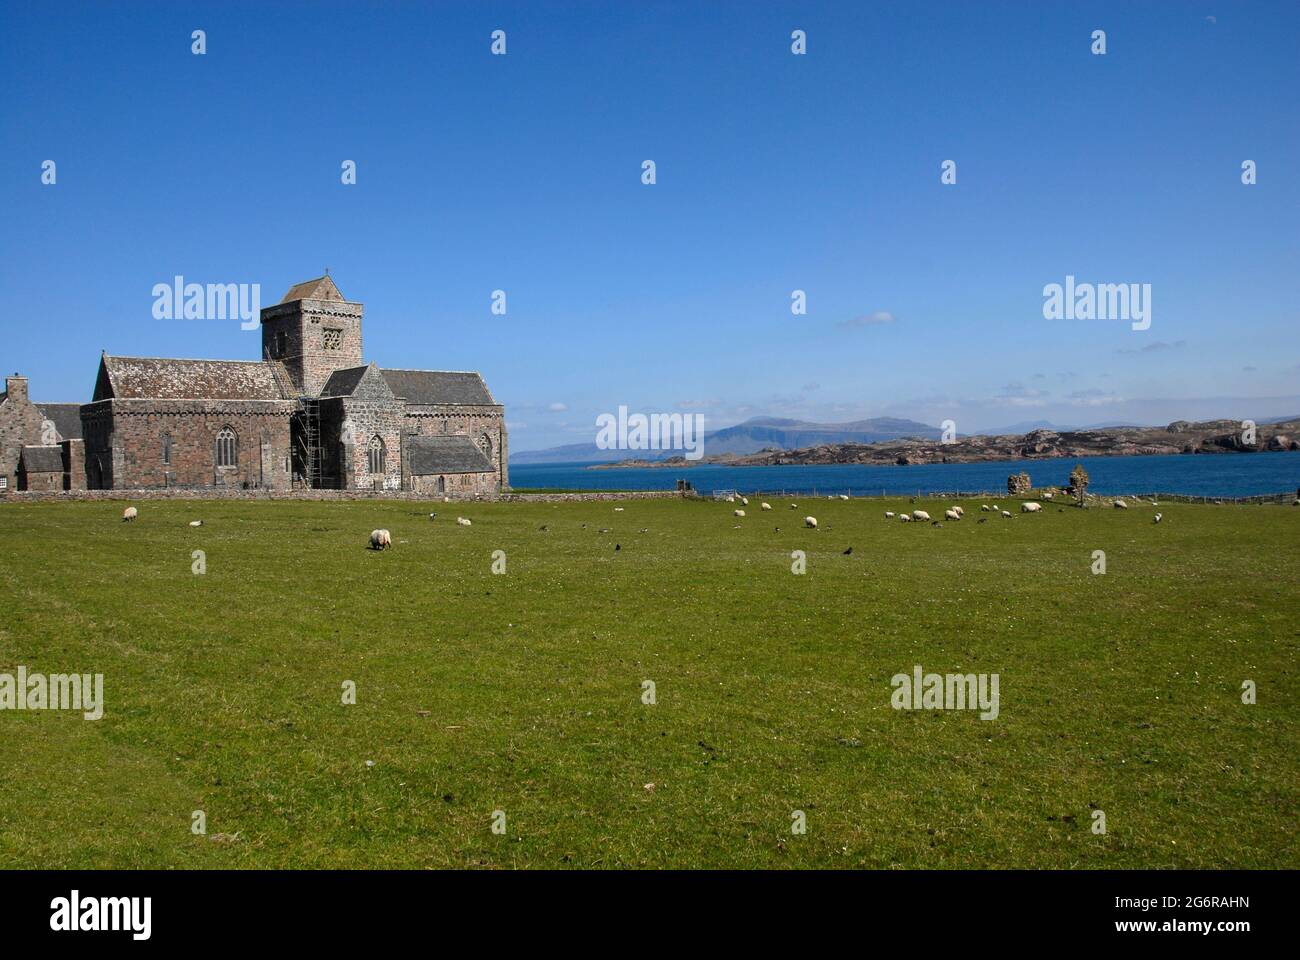 Iona Abbey beyond a field with sheep grazing, Iona, Scotland with Mull beyond Stock Photo